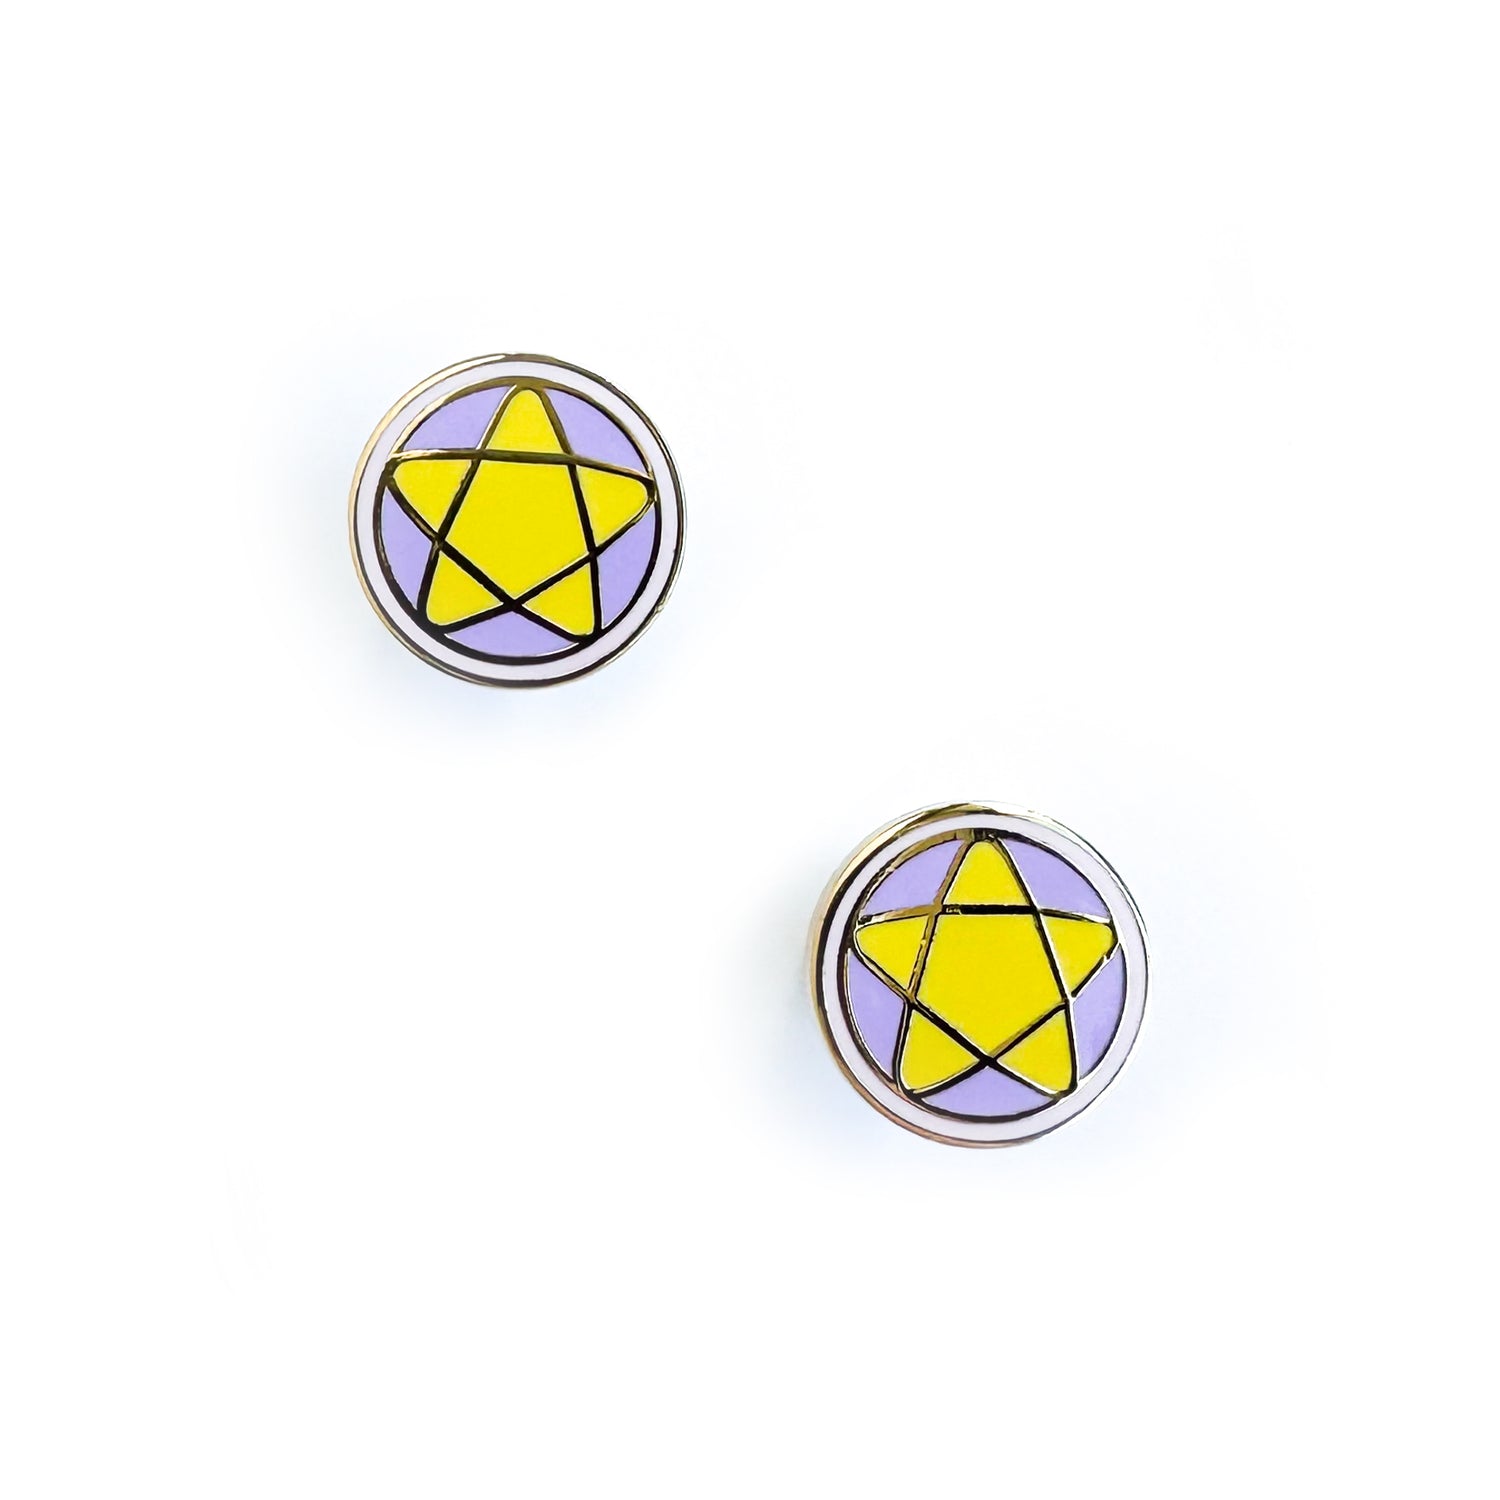 Stud earrings in the shape of pentacles with a bright yellow star, purple background and pastel pink outer ring. 